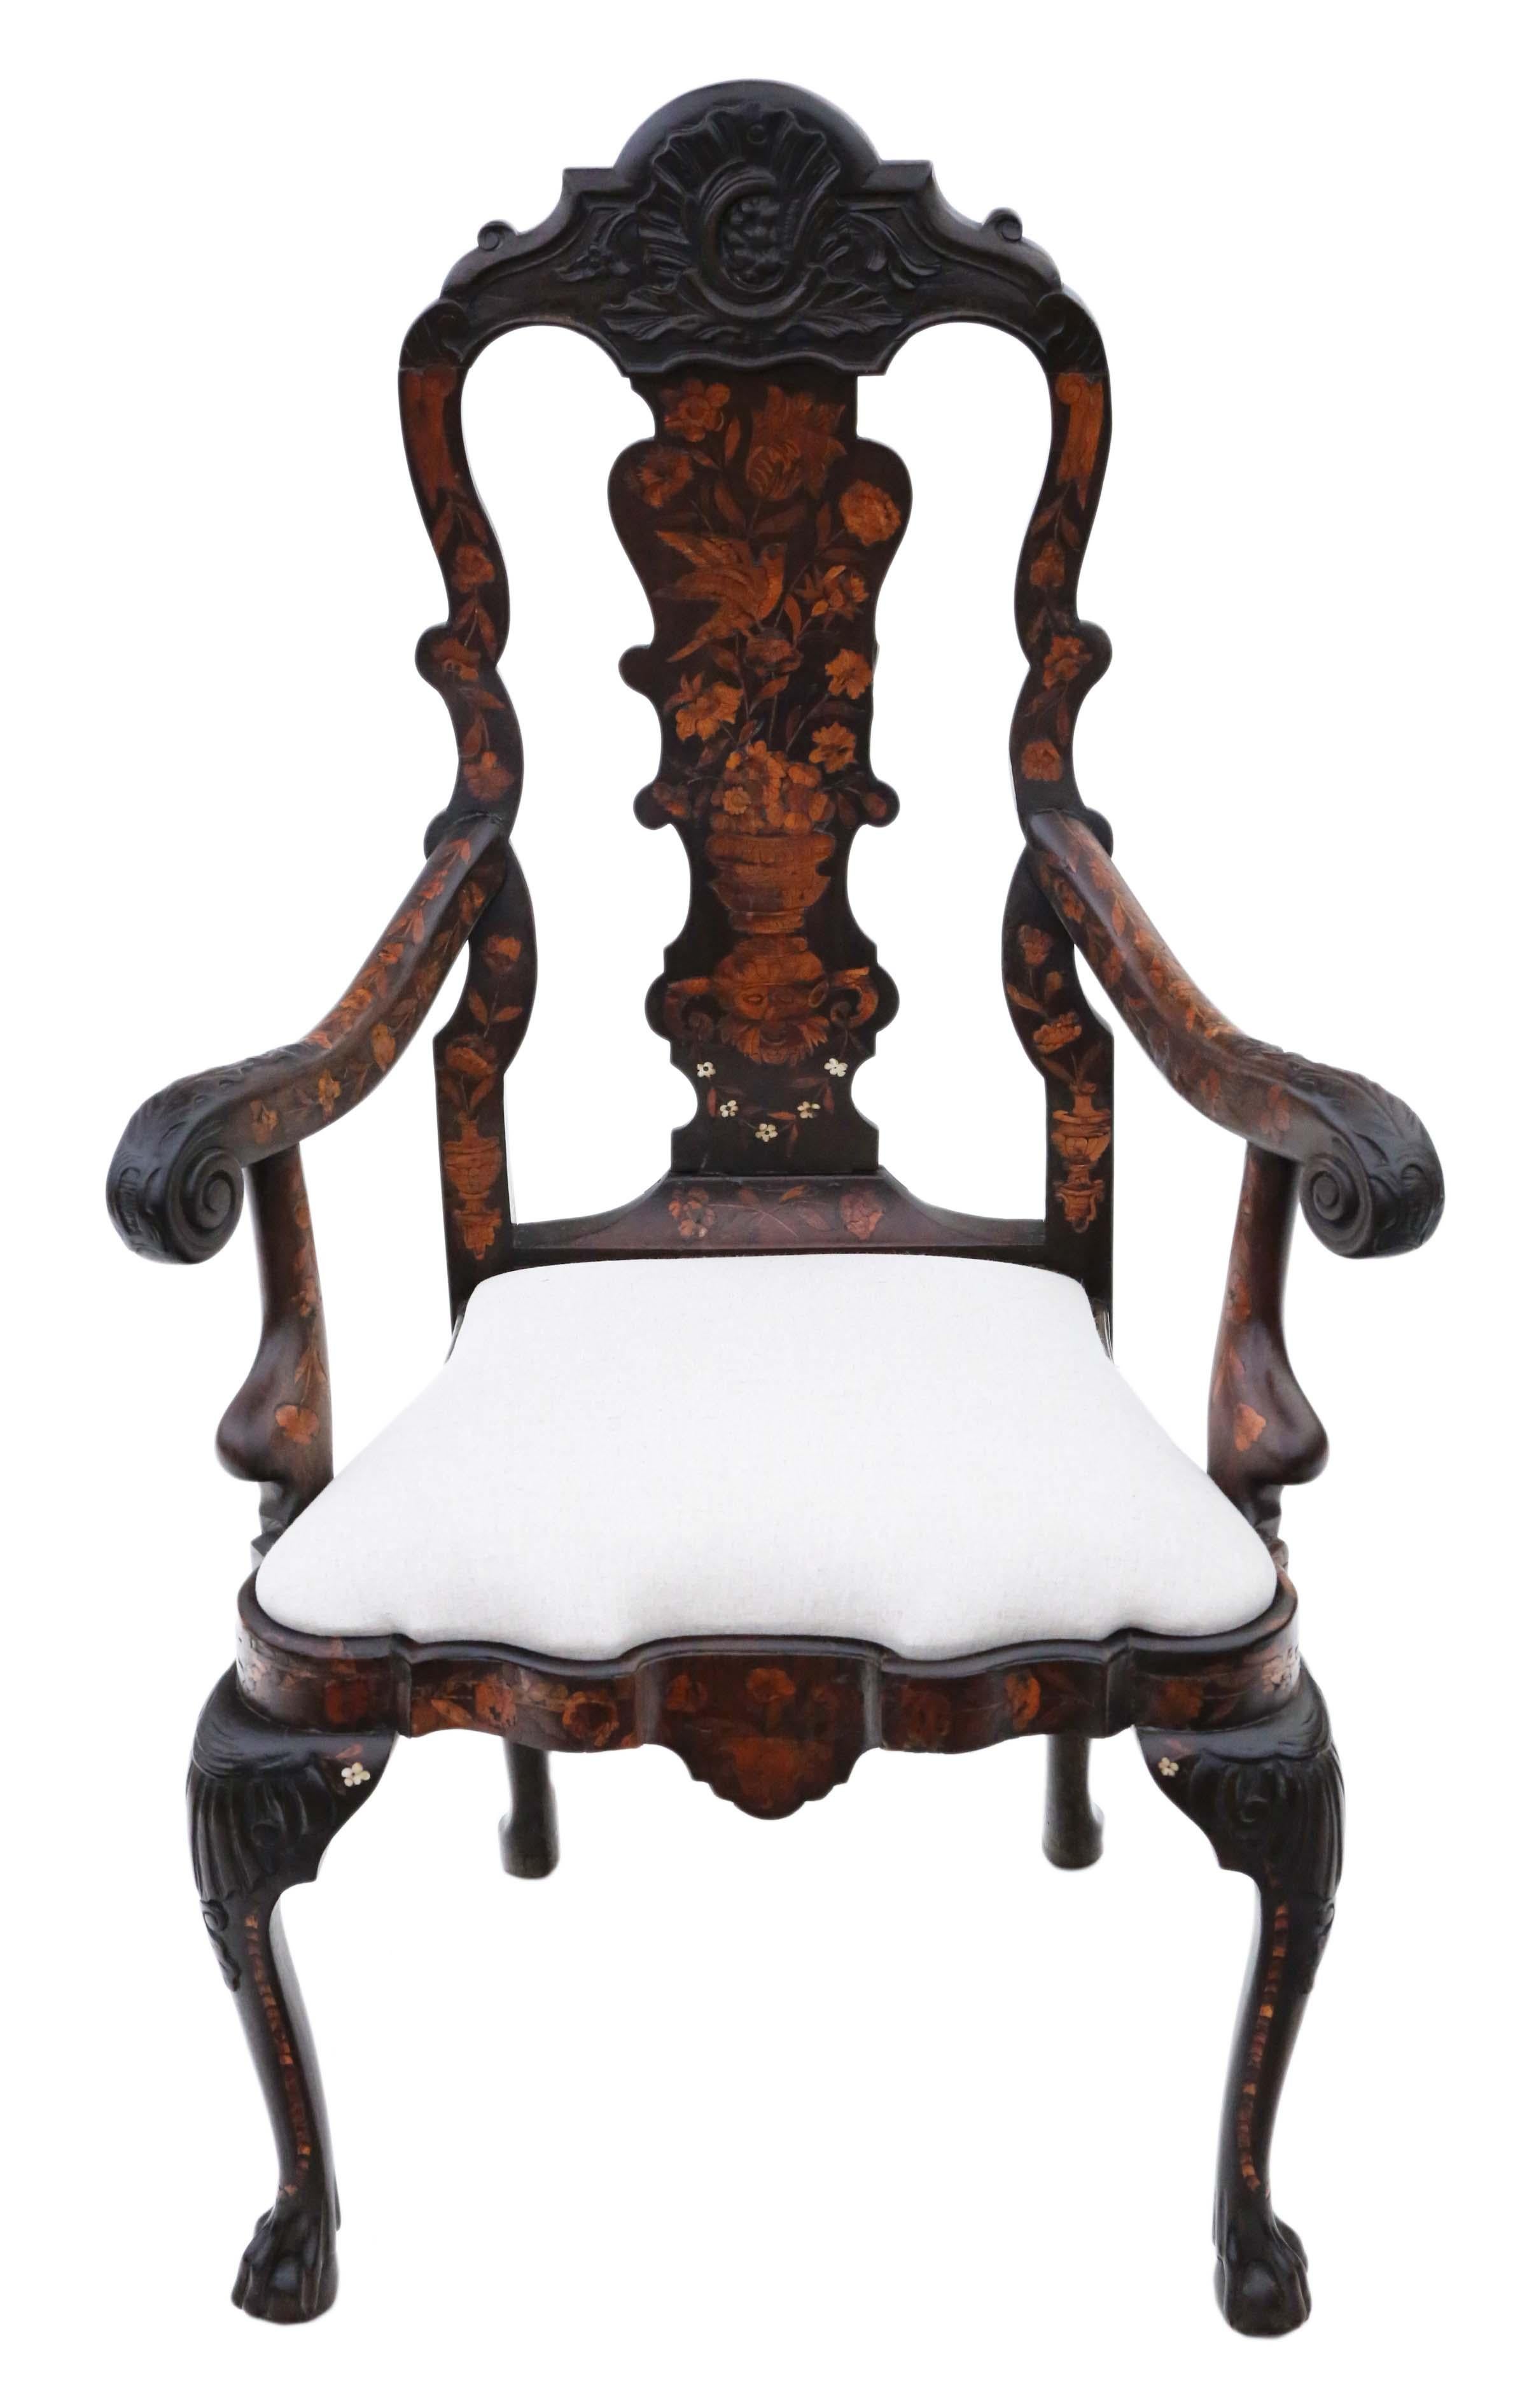 Experience the exquisite craftsmanship of this very fine quality 18th Century Dutch marquetry elbow arm or desk chair, a versatile piece that could also serve as a side, hall, or carver chair. This chair stands out for its exceptional marquetry and